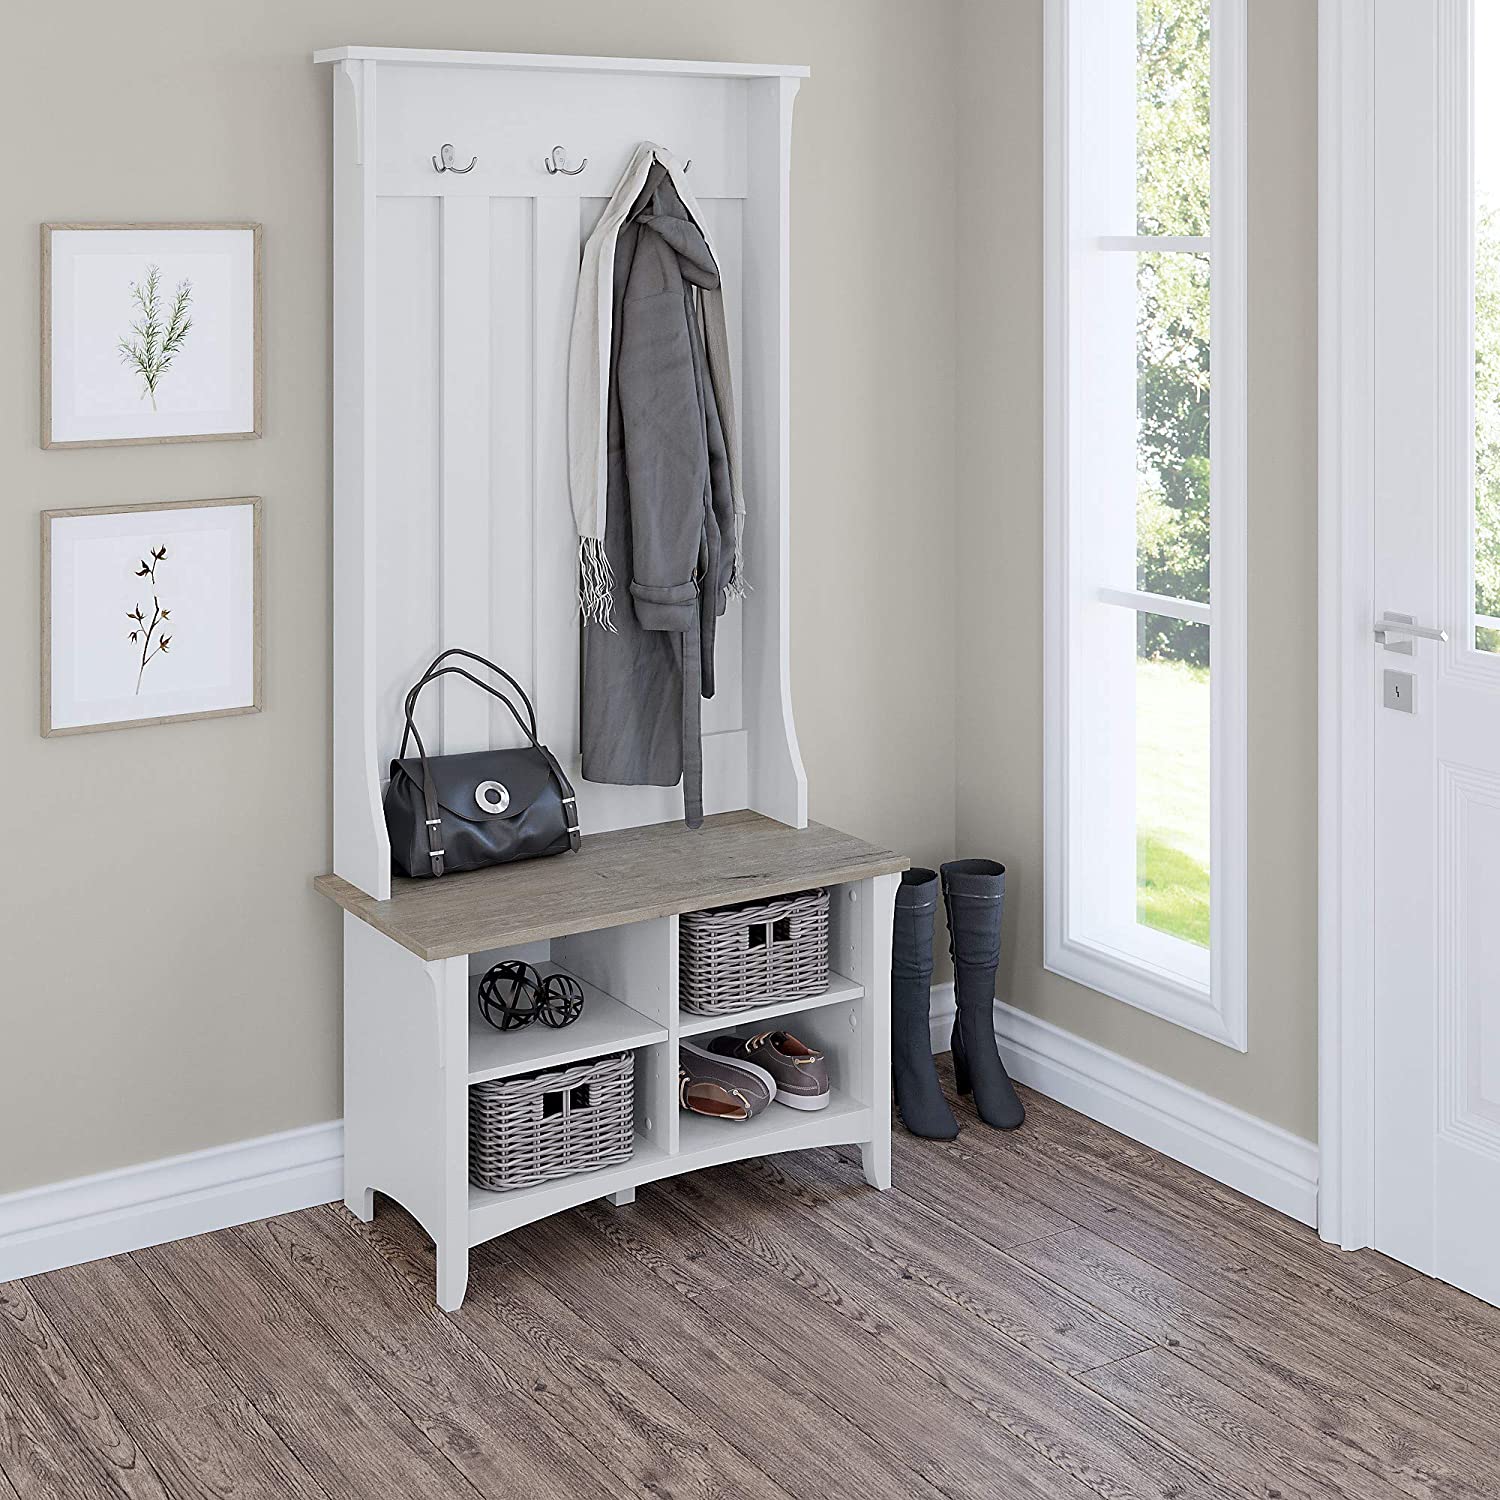 Storage solution for instant mud room with bench